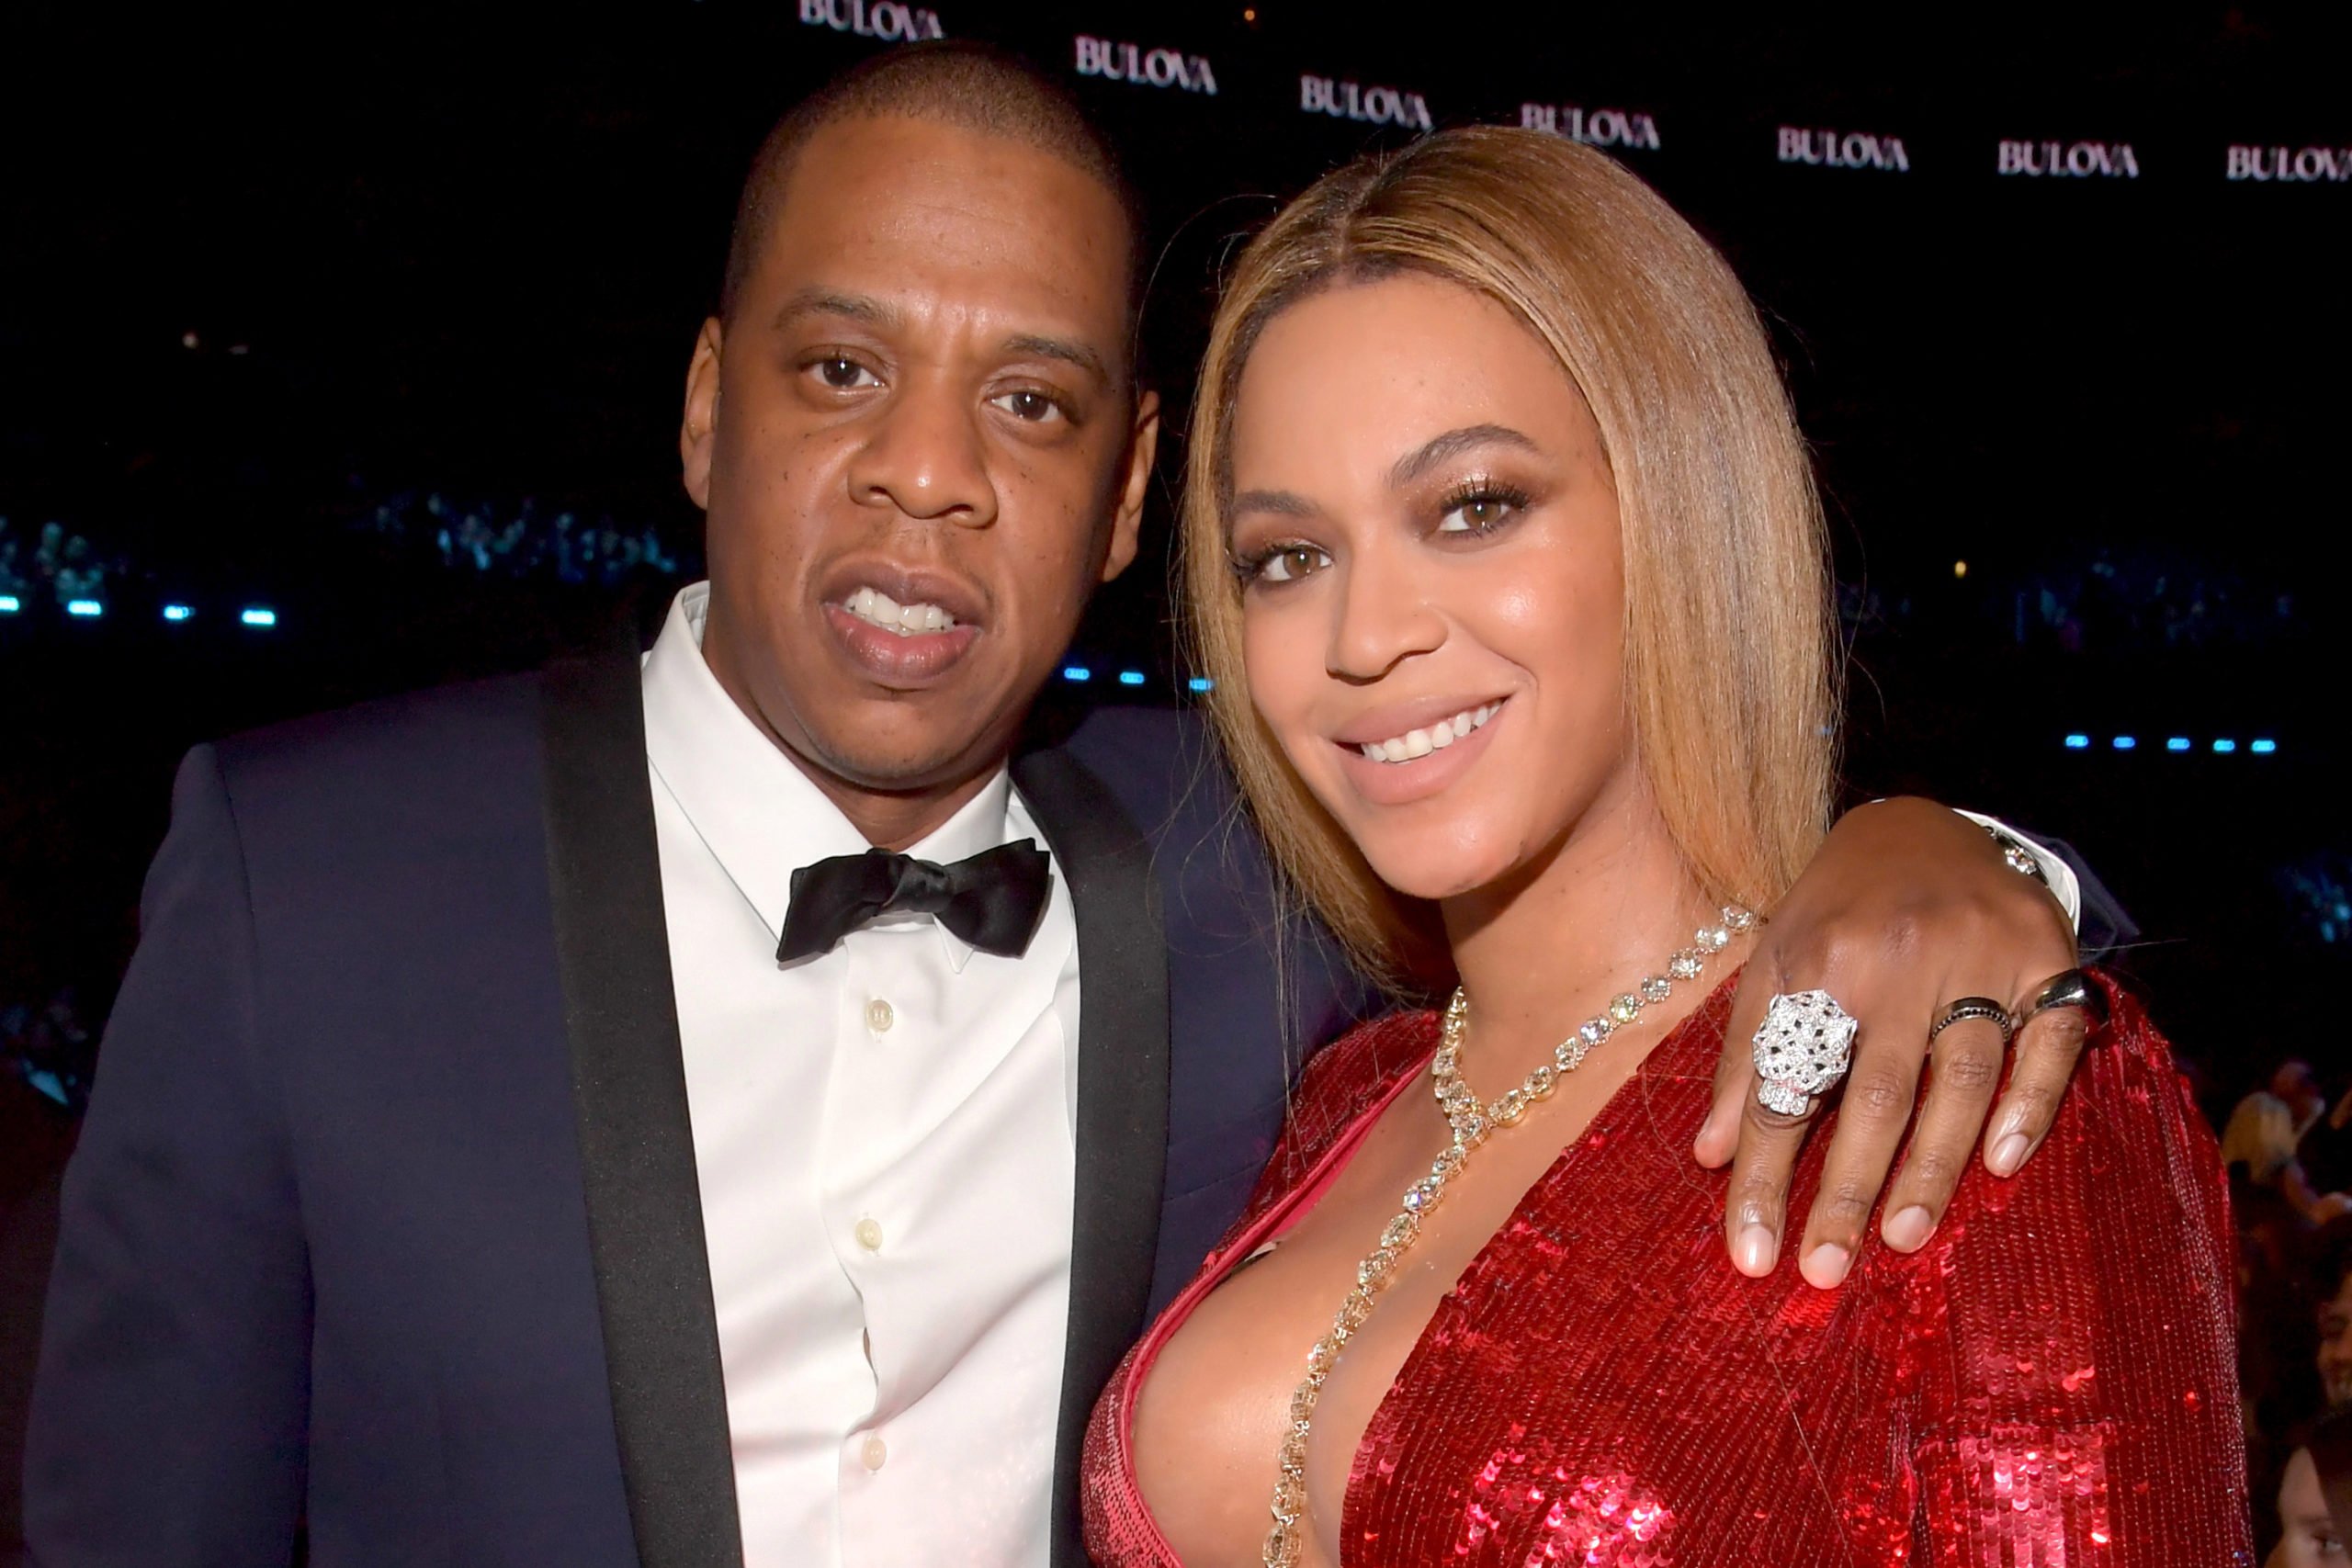 Who did Jay-Z date before Beyoncé?